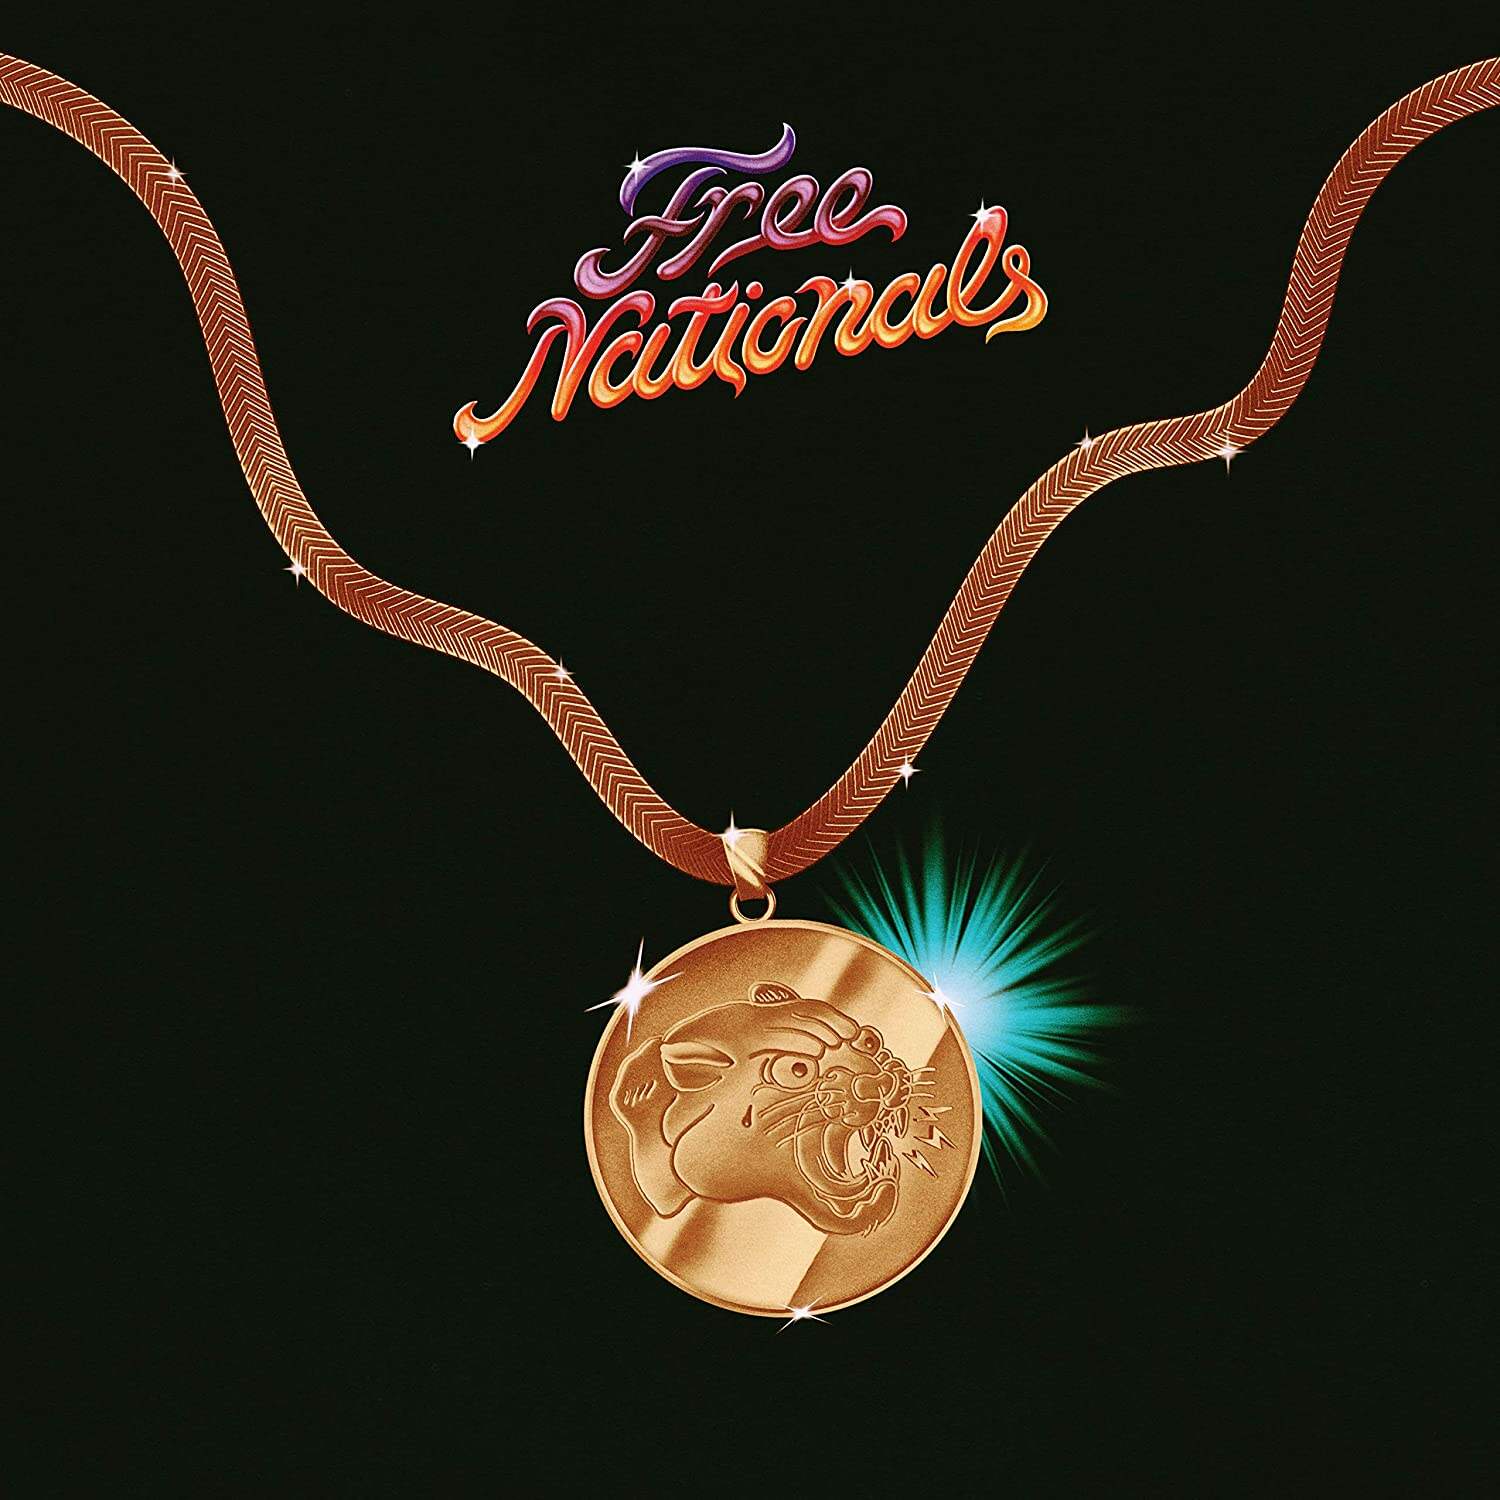 FREE NATIONALS (ANDERSON .PAAKS BAND) - Free Nationals - 2LP  - Limited Edition Gold Nugget Vinyl